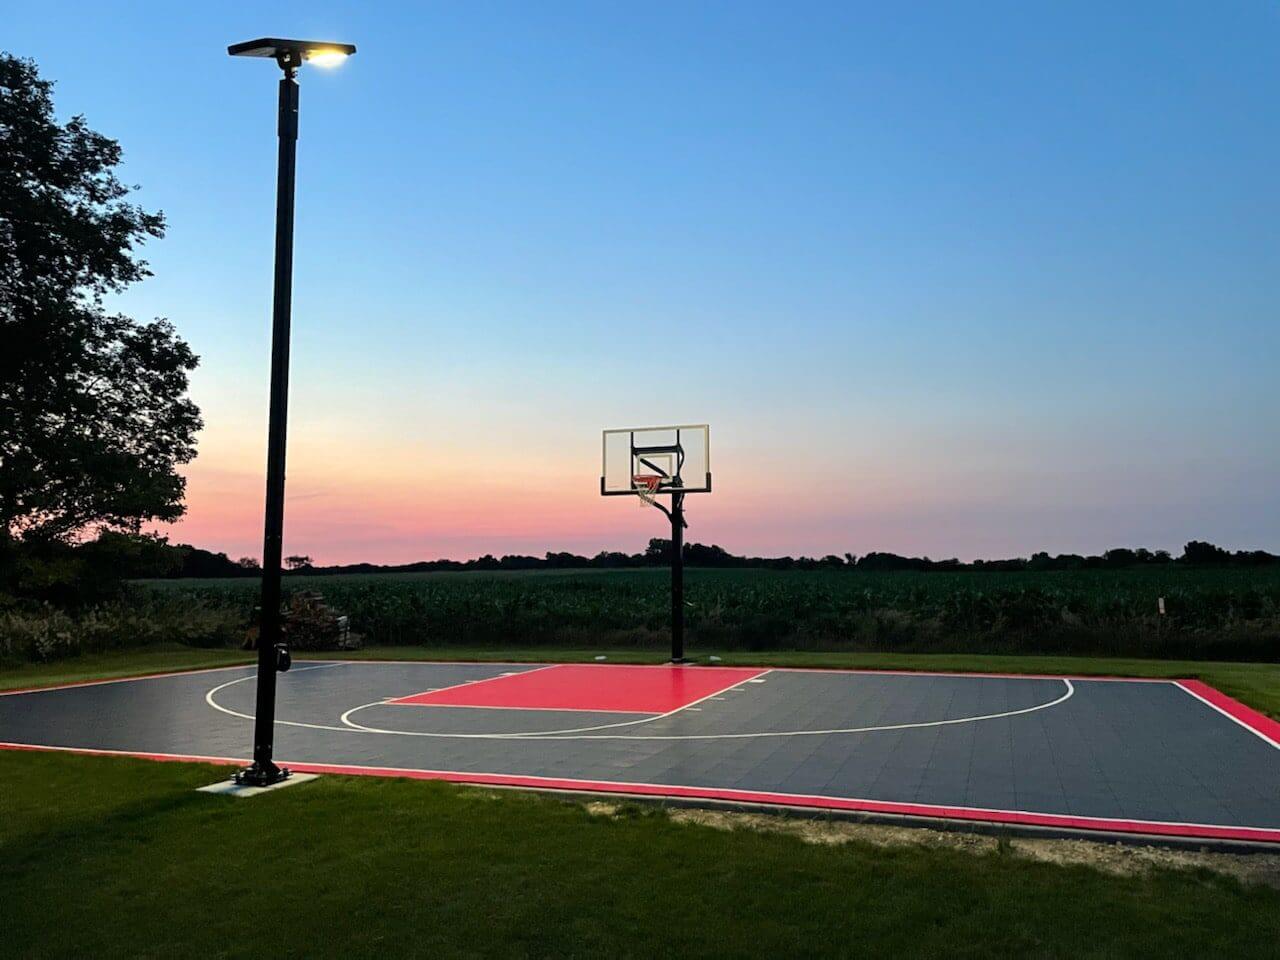 An outdoor basketball court with lights at dusk.